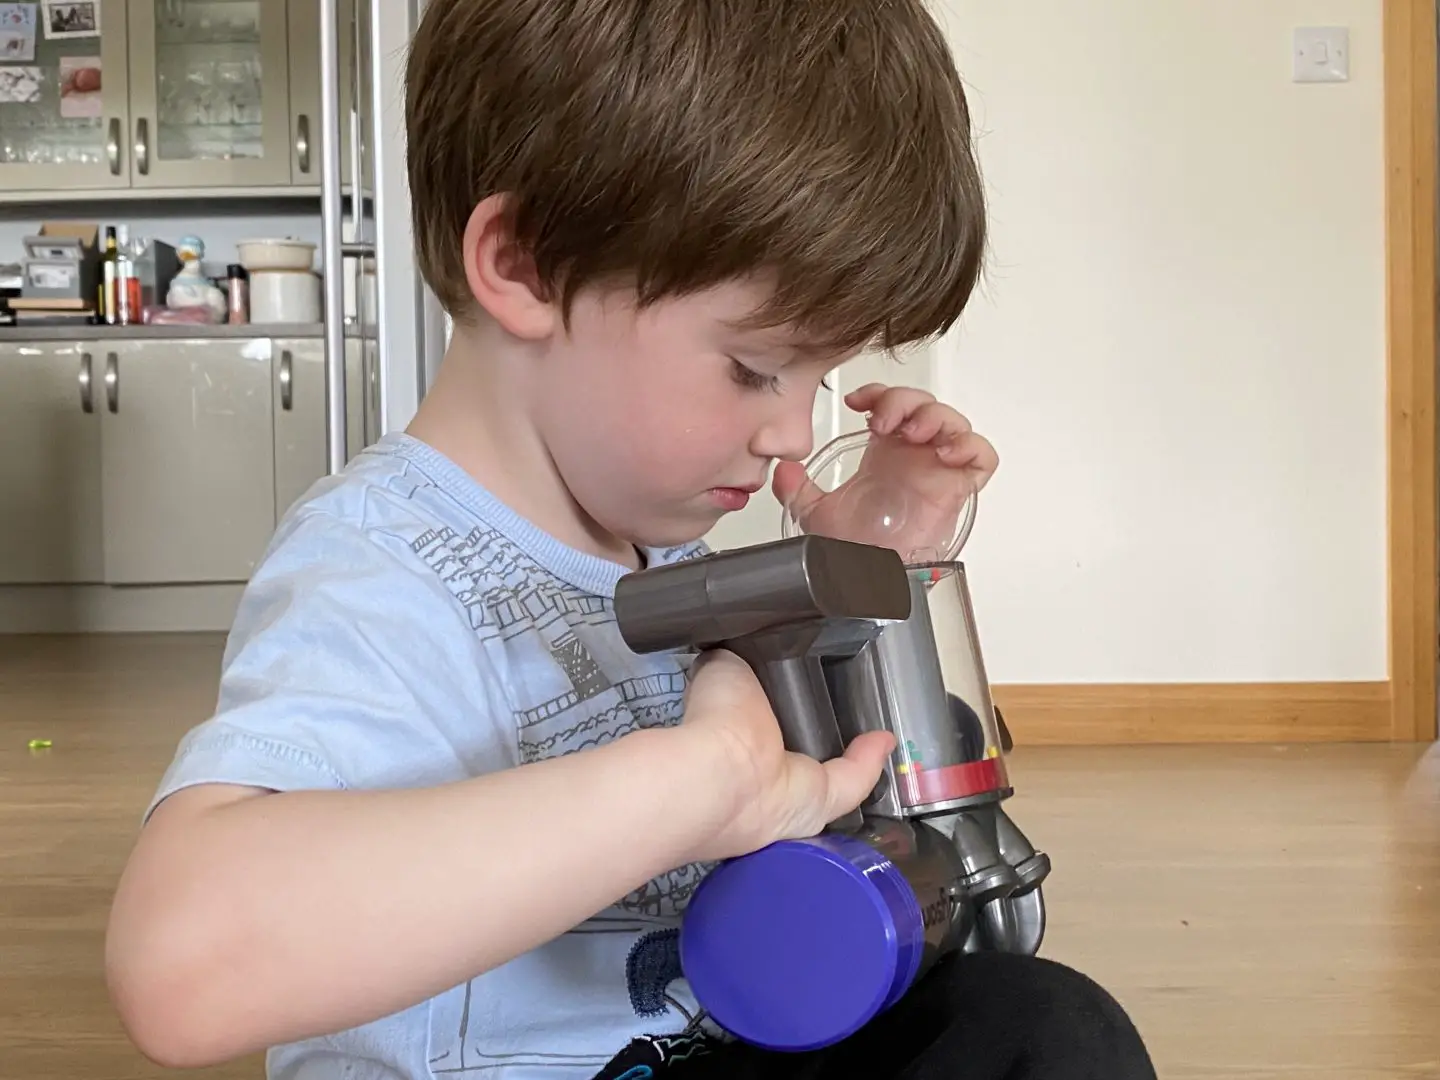 A boy looking into the dust compartment of a toy Dyson